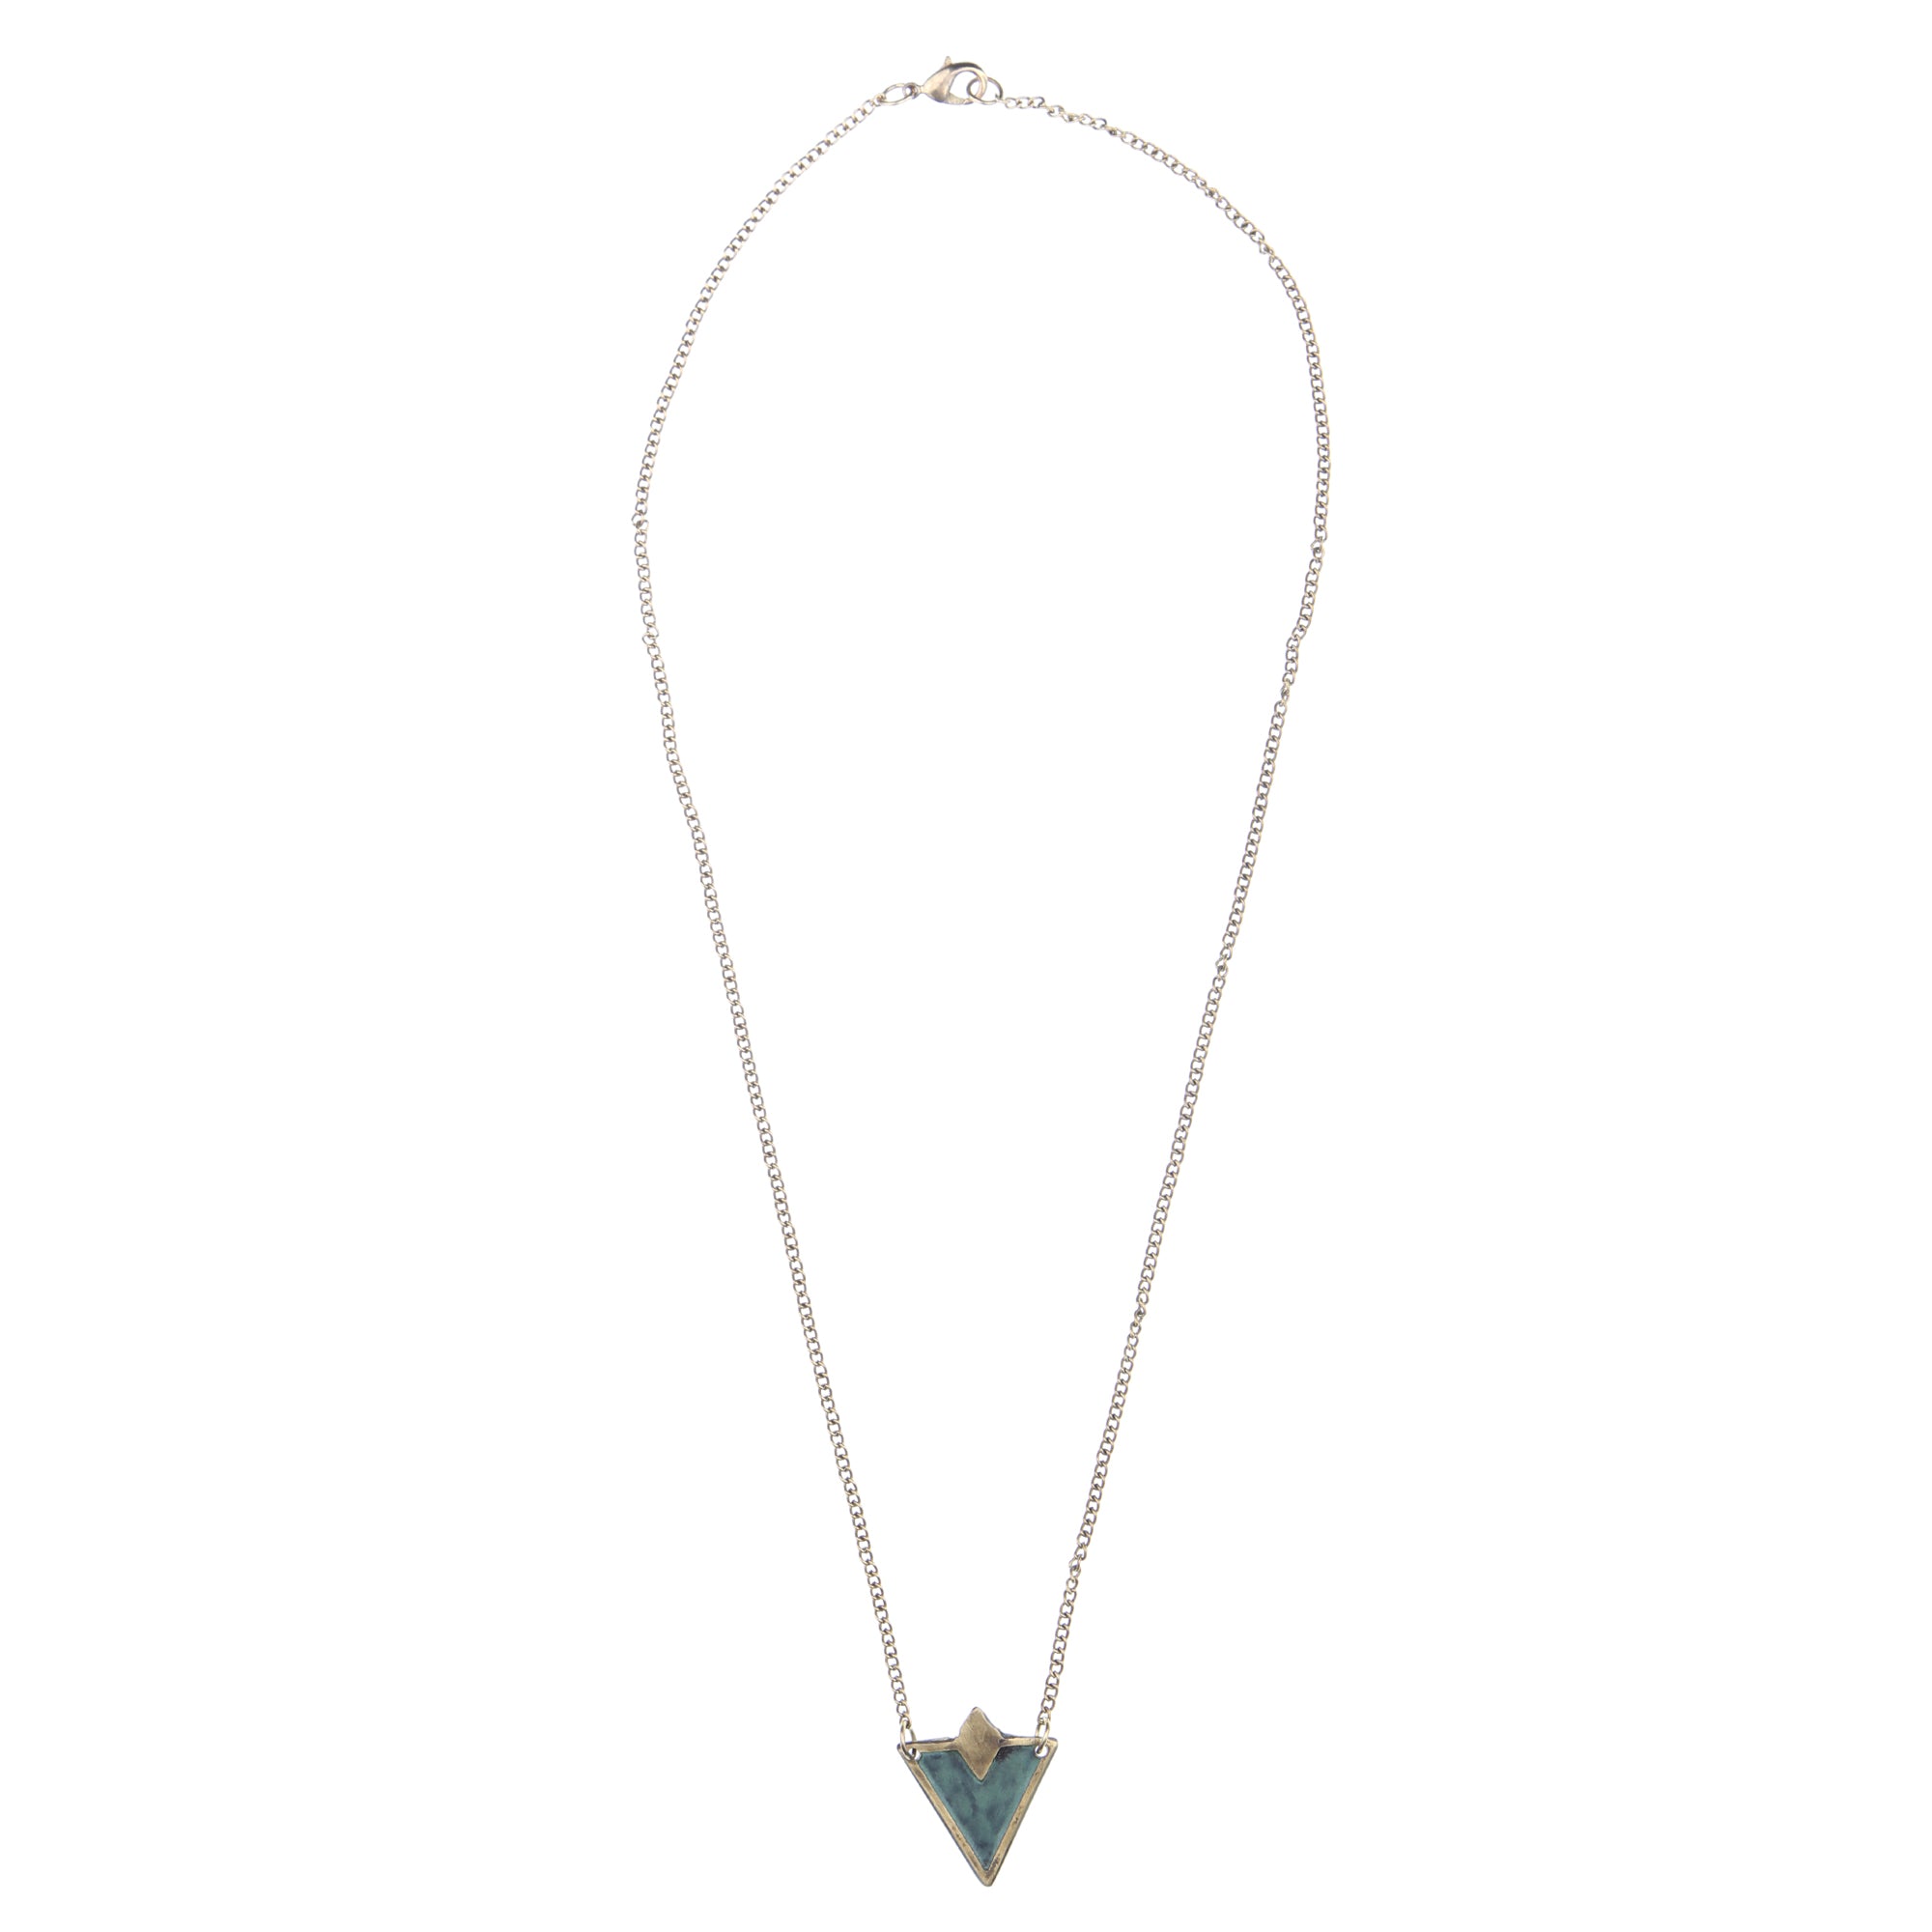 Ina Necklace by Daughters of the Ganges